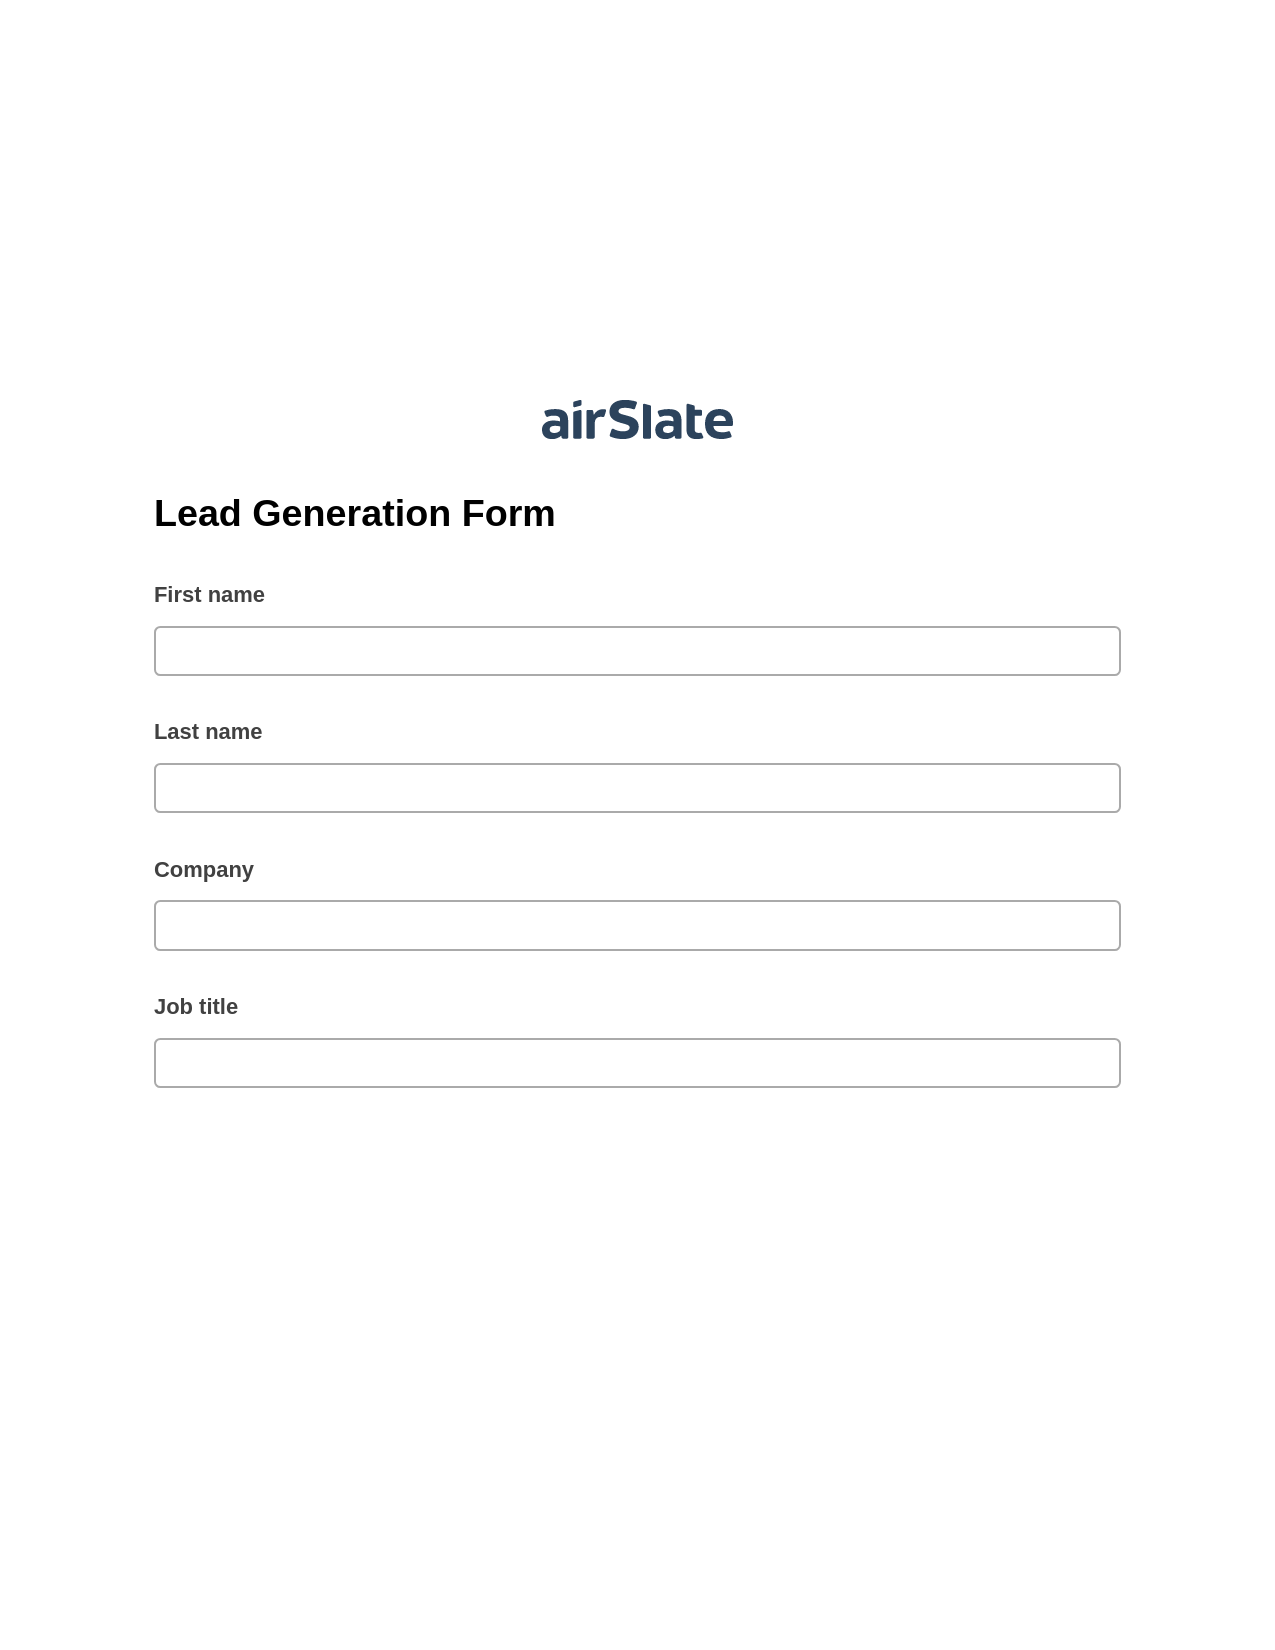 Lead Generation Form Pre-fill from Litmos bot, Custom Field's Value Bot, Archive to Dropbox Bot